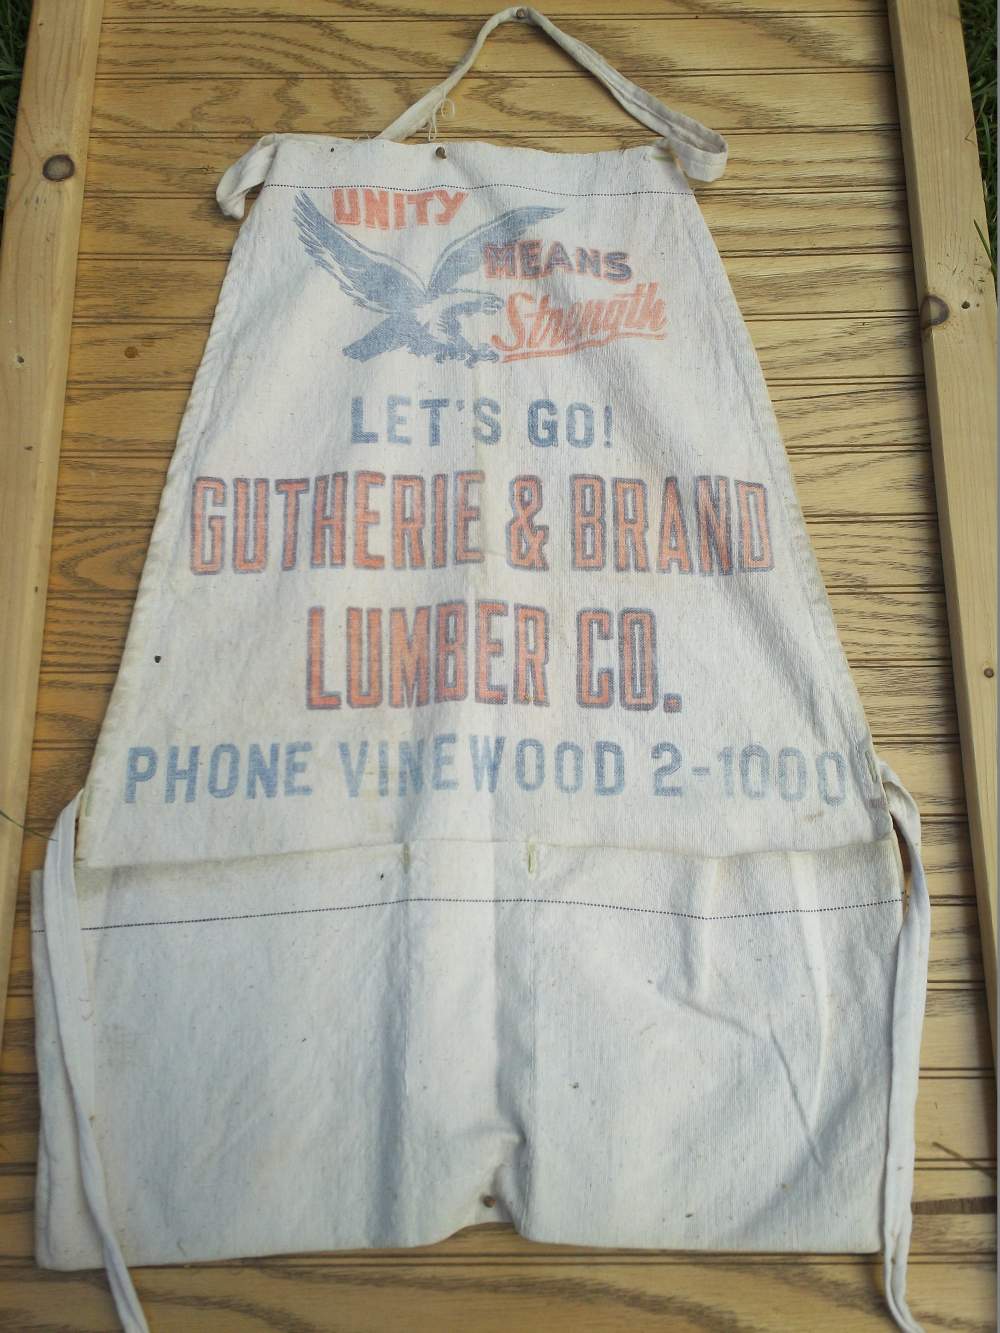 Name:  GLC Gutherie and Brand Lumber.jpg
Views: 903
Size:  142.7 KB